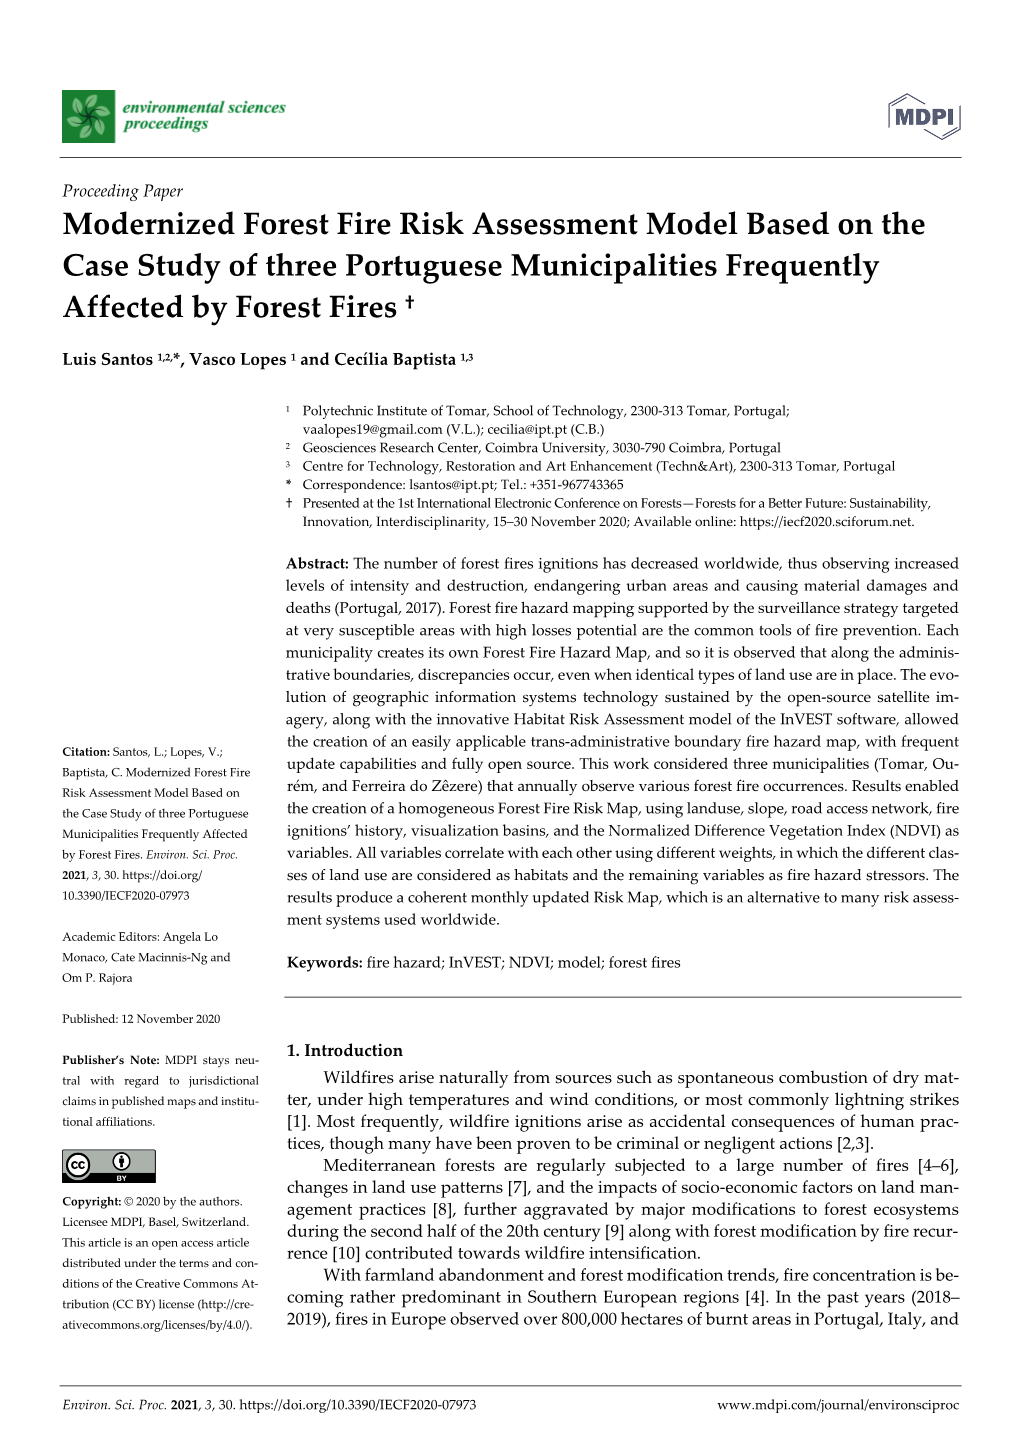 Modernized Forest Fire Risk Assessment Model Based on the Case Study of Three Portuguese Municipalities Frequently Affected by Forest Fires †